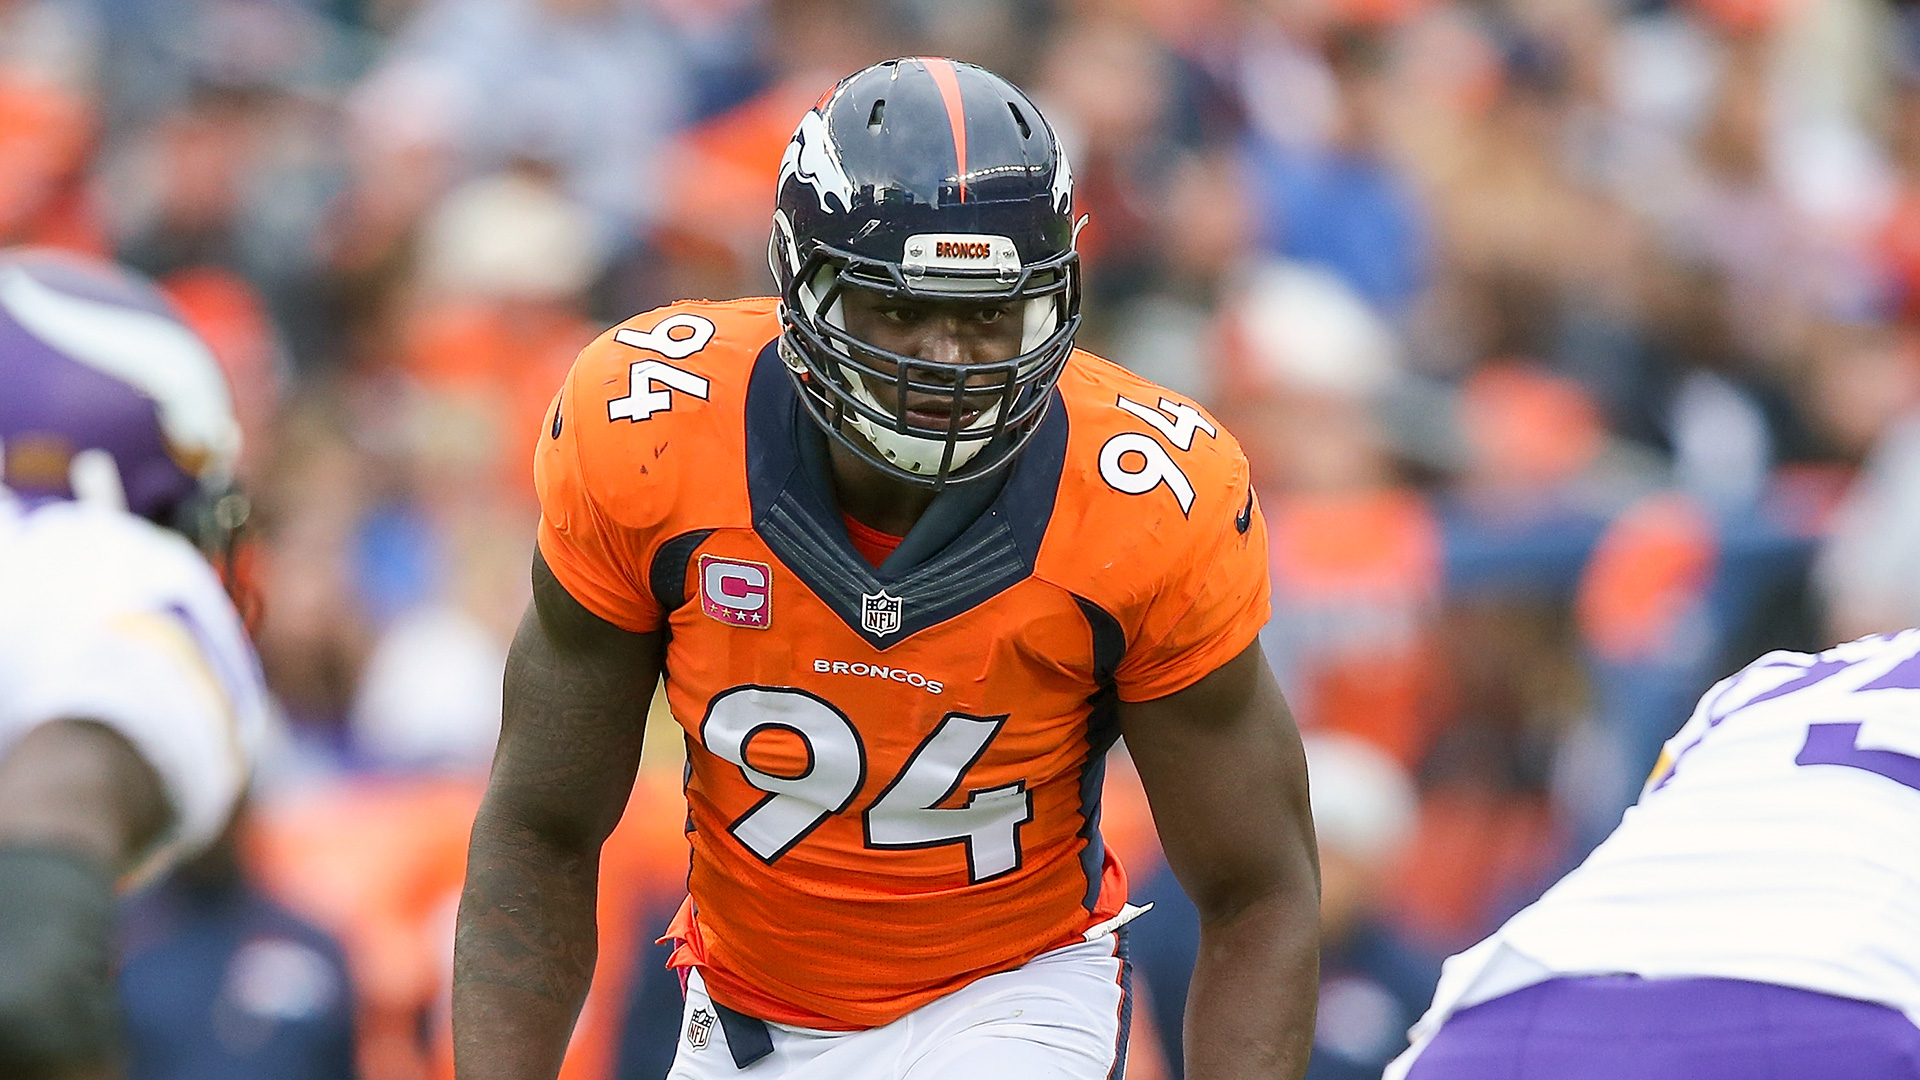 DeMarcus Ware opens up about his retirement from NFL Sporting News